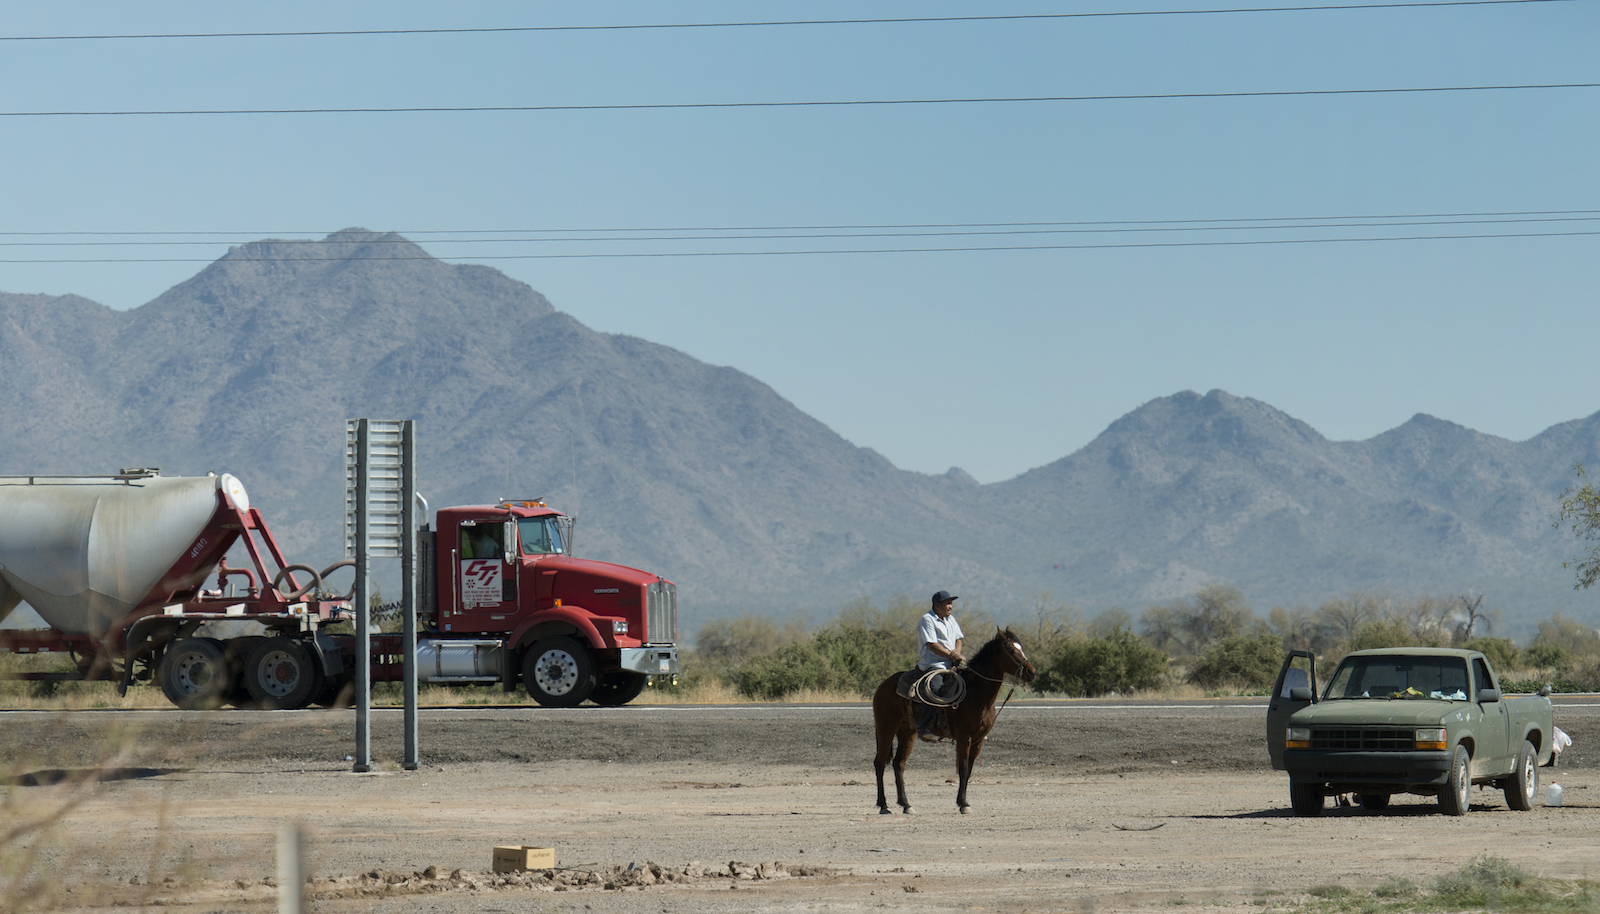 a red truck, a man on a horse, and a pickup truck stand on a dry, mountainous landscape